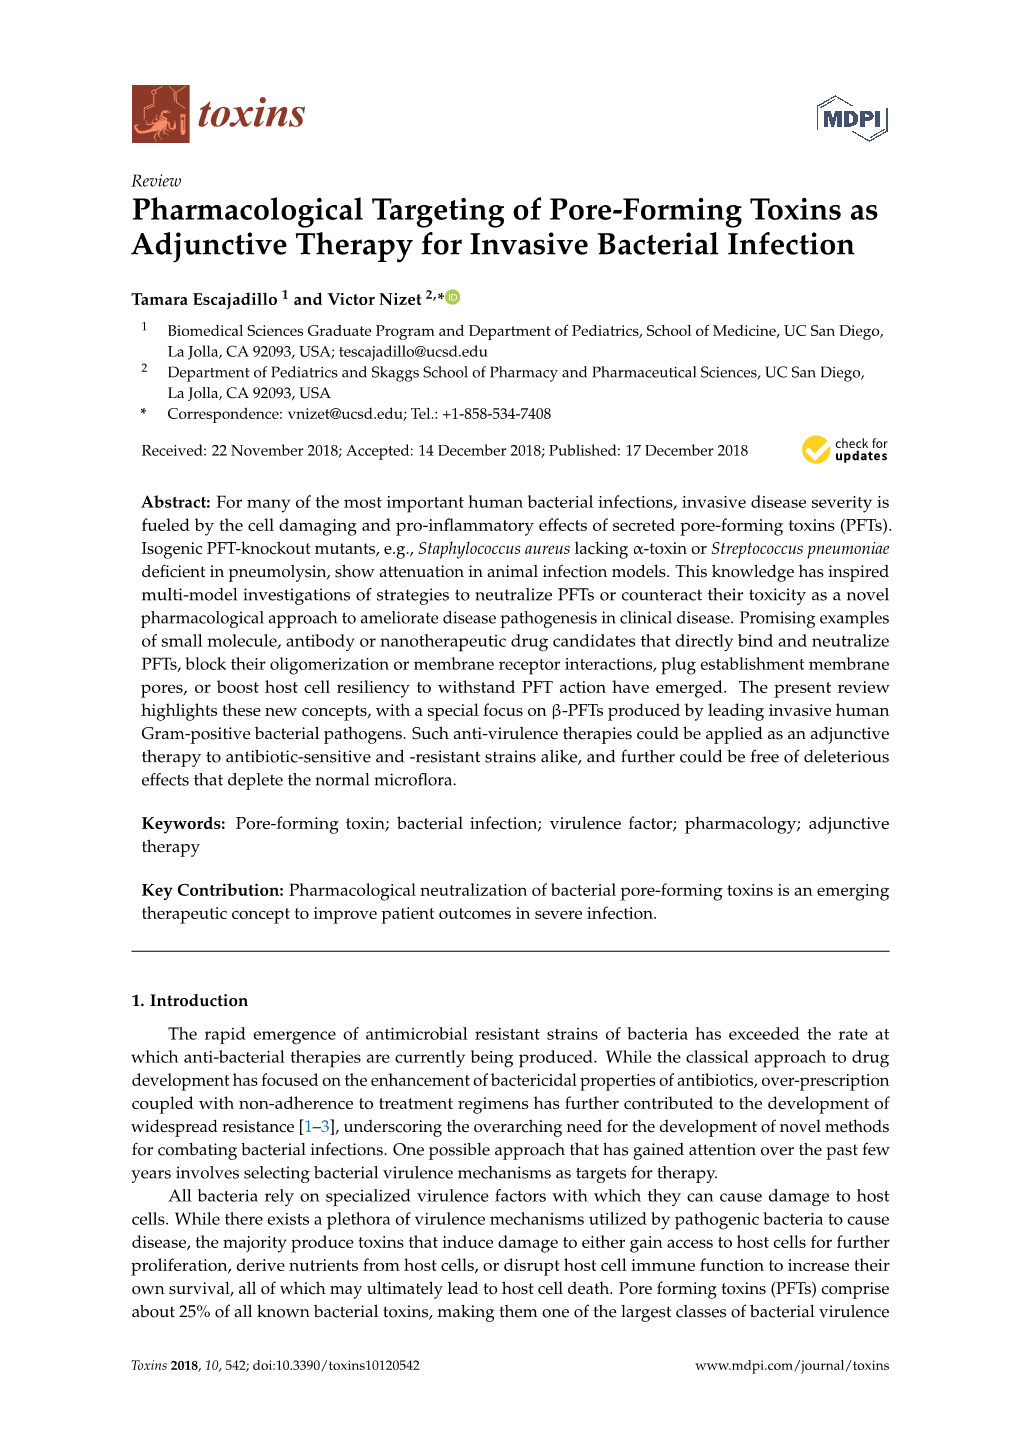 Pharmacological Targeting of Pore-Forming Toxins As Adjunctive Therapy for Invasive Bacterial Infection